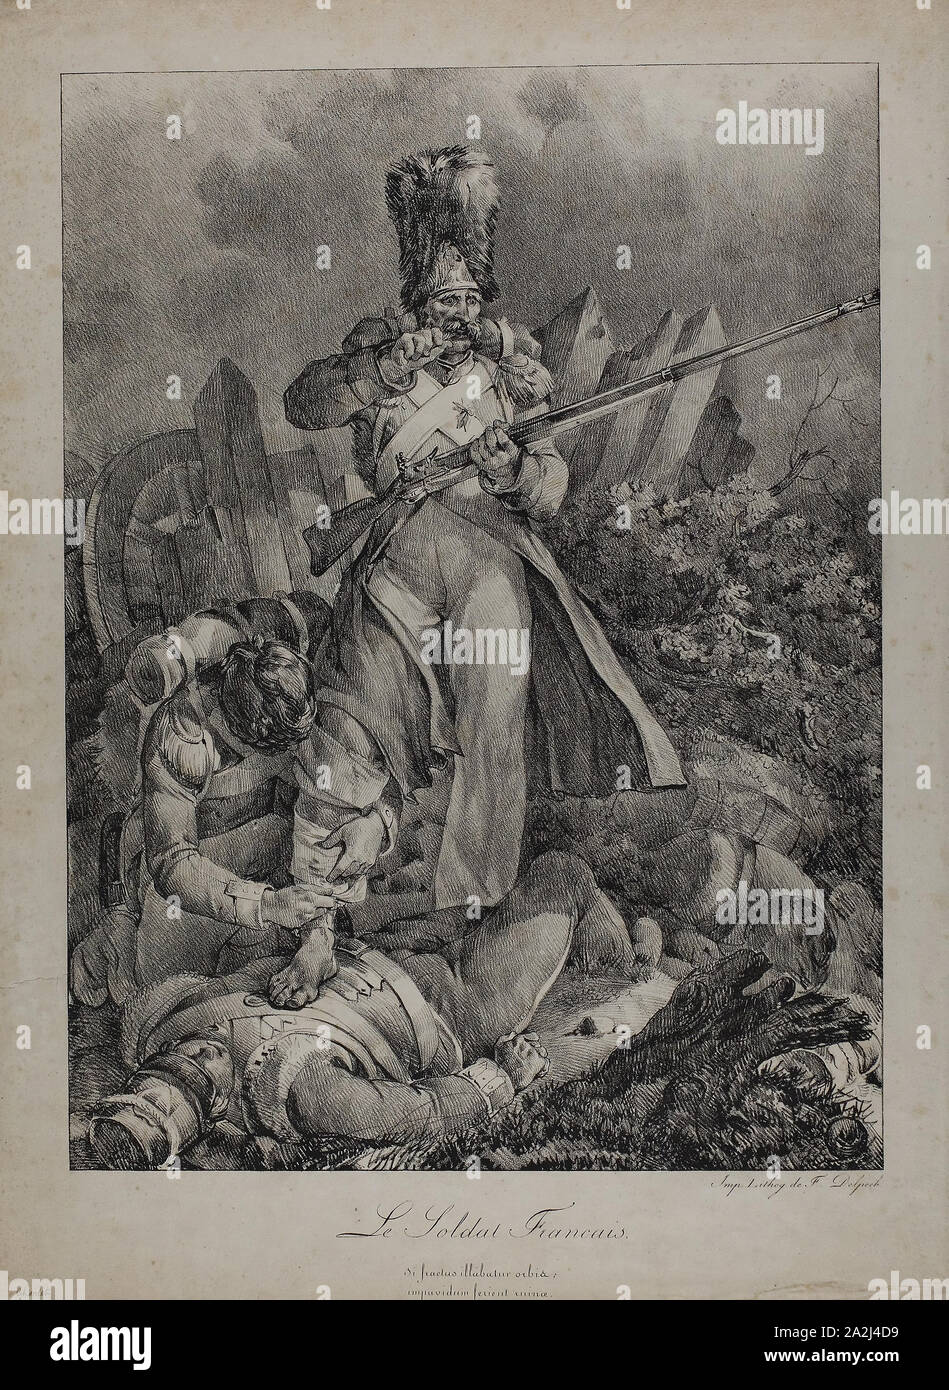 The French Soldier, 1818/19, Nicolas Toussaint Charlet, French, 1792-1845, France, Lithograph in black on cream wove paper, 458 × 339 mm (image), 544 × 401 mm (sheet Stock Photo